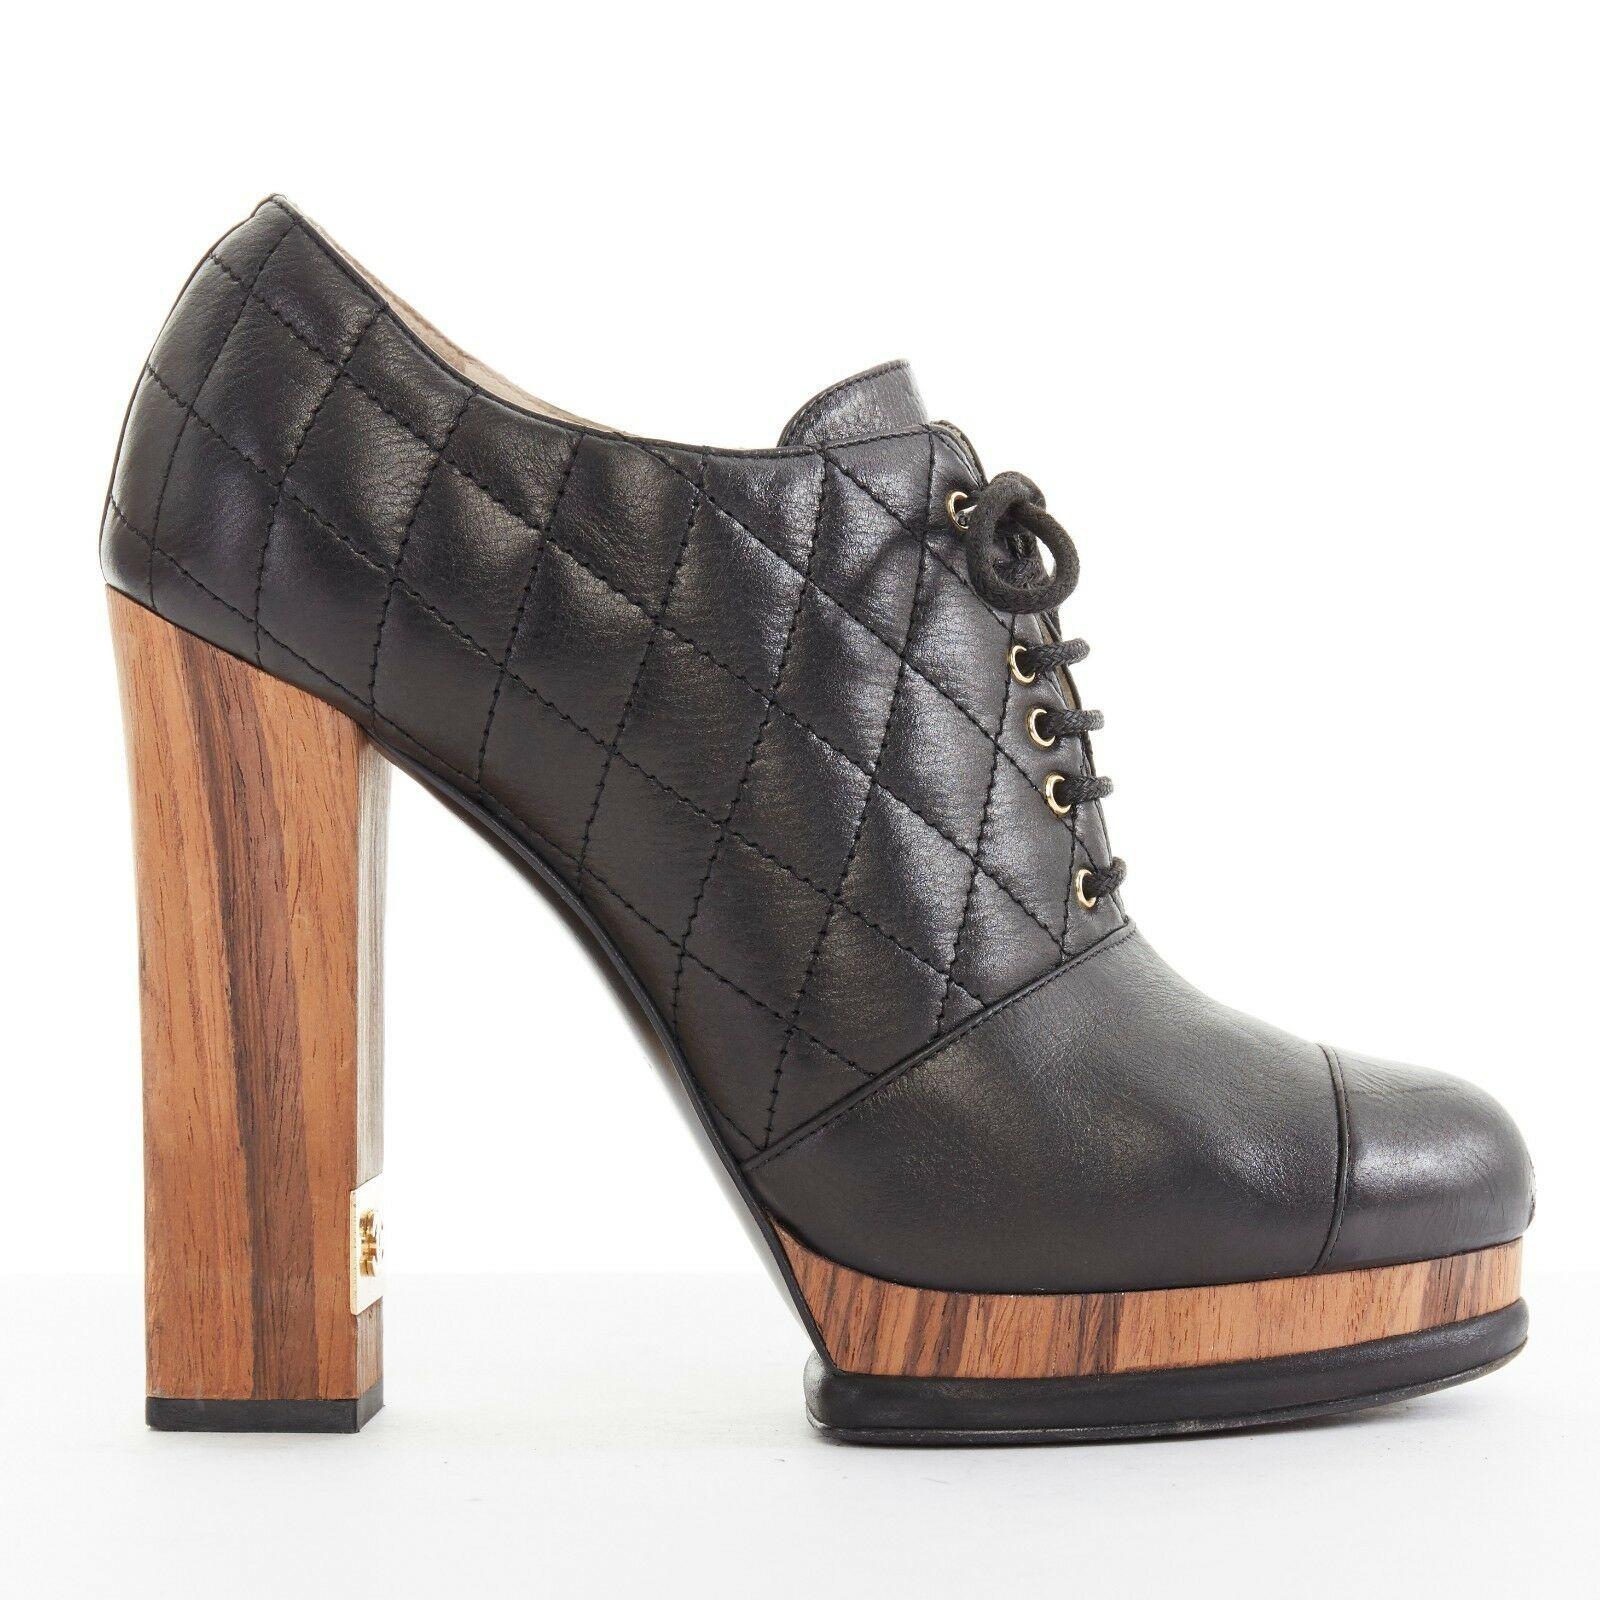 CHANEL black leather quilt stitched wooden platform CC chunky heel bootie EU39C

CHANEL
Black leather upper. Toe cap stitching. Quilt stitching on leather upper. Gold-tone metal grommet. Lace front closure. Natural wood and leather layered platform.